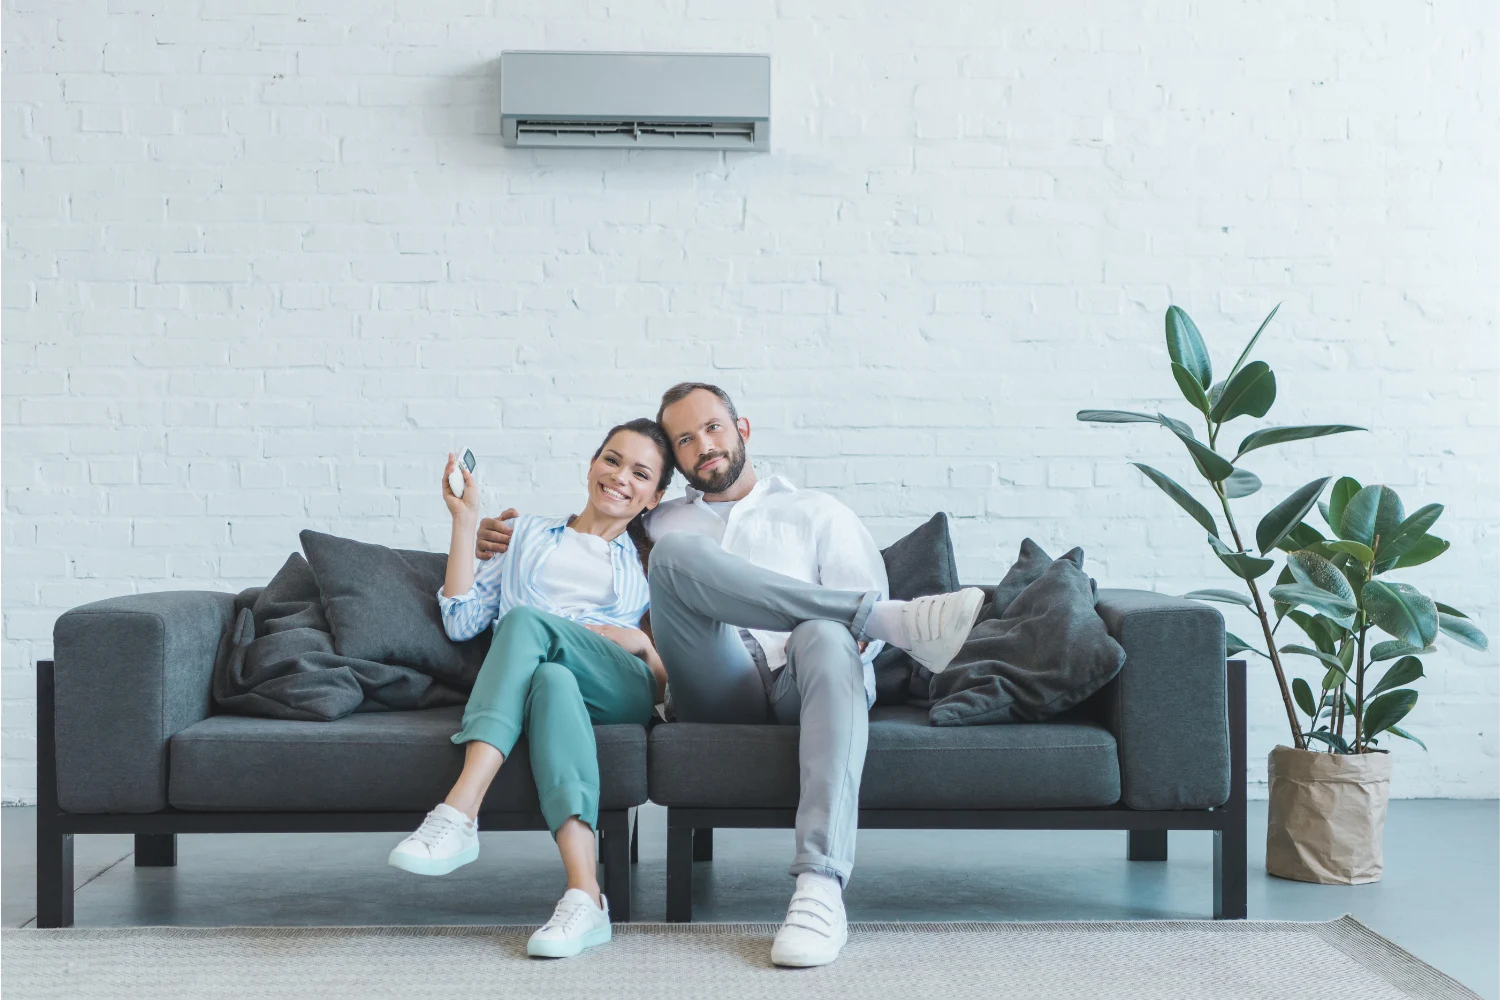 Couple chilling in a living room with an air conditioner. Featured image for “8 Surprisingly Cool Air Conditioner Facts You Should Know”.